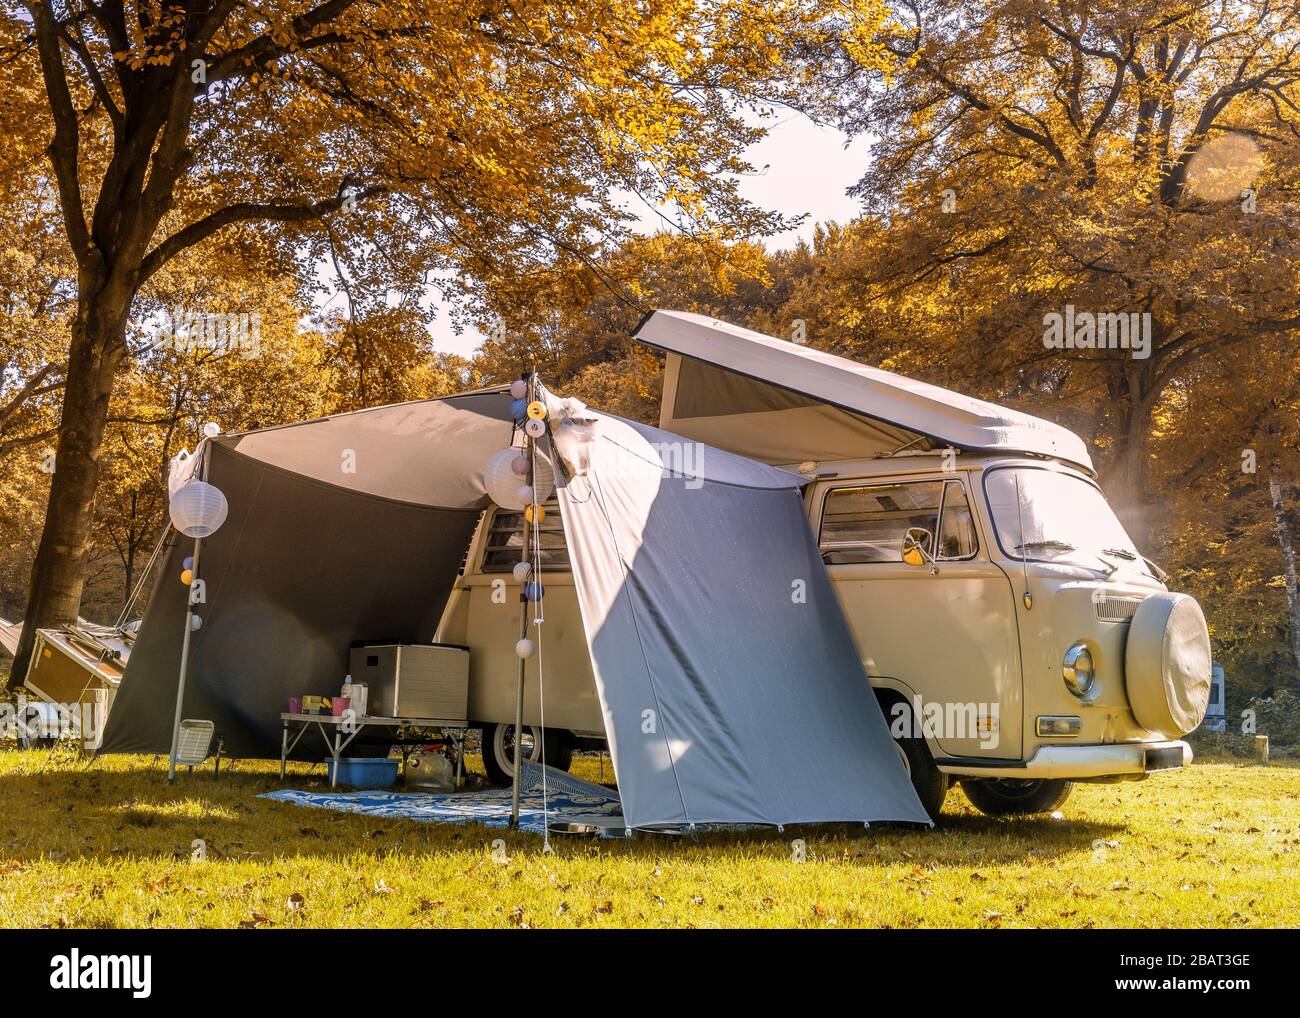 Speulderbos Veluwe Netherlands October 2017,Hipster retro minni van in the autumn forest, , retro camping car, minu bus during autumn seasons at the Stock Photo